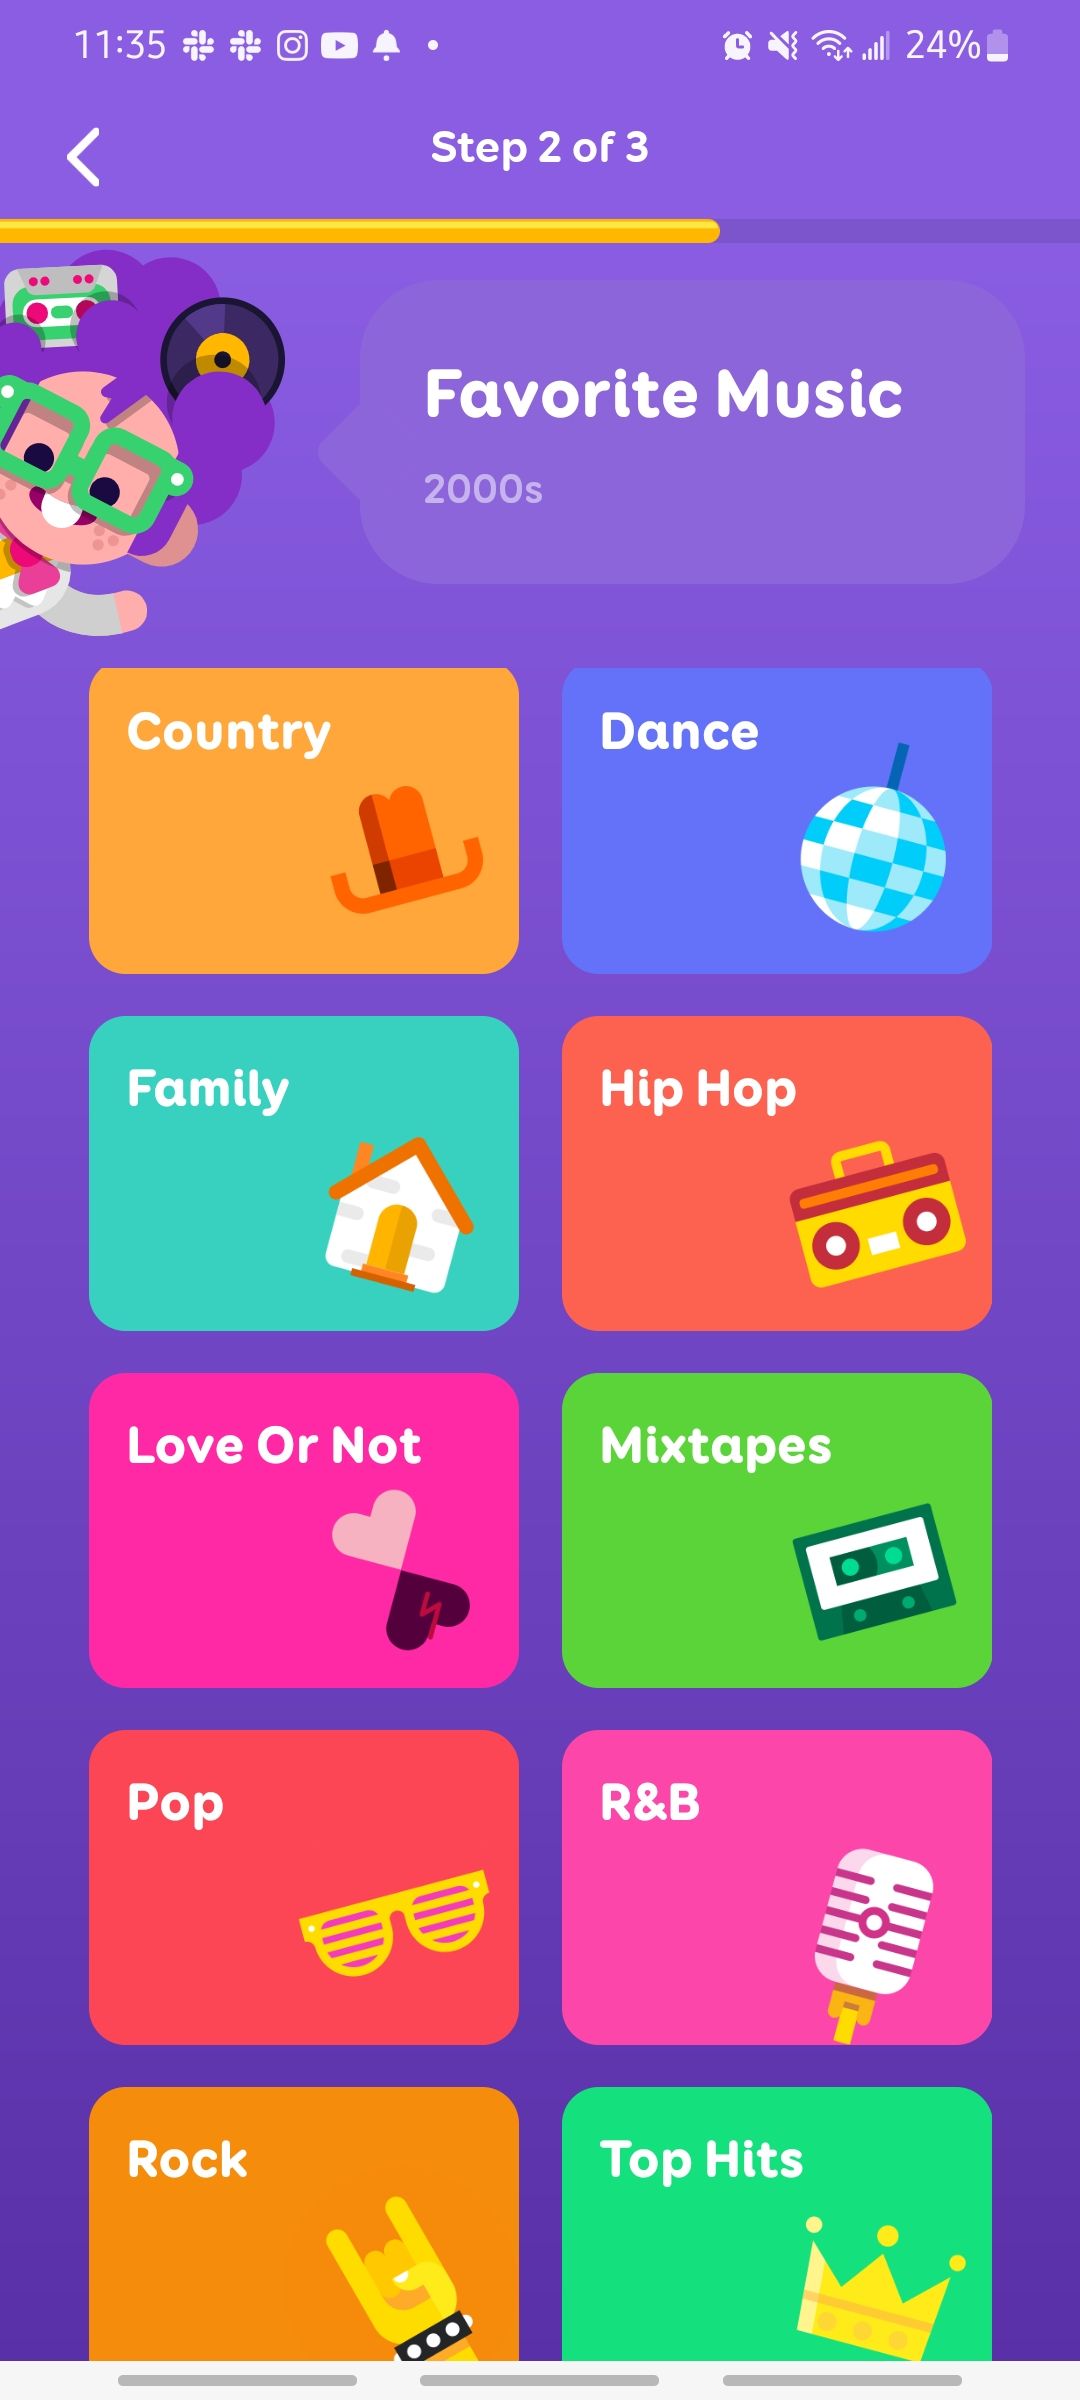 songpop app showing different music categories